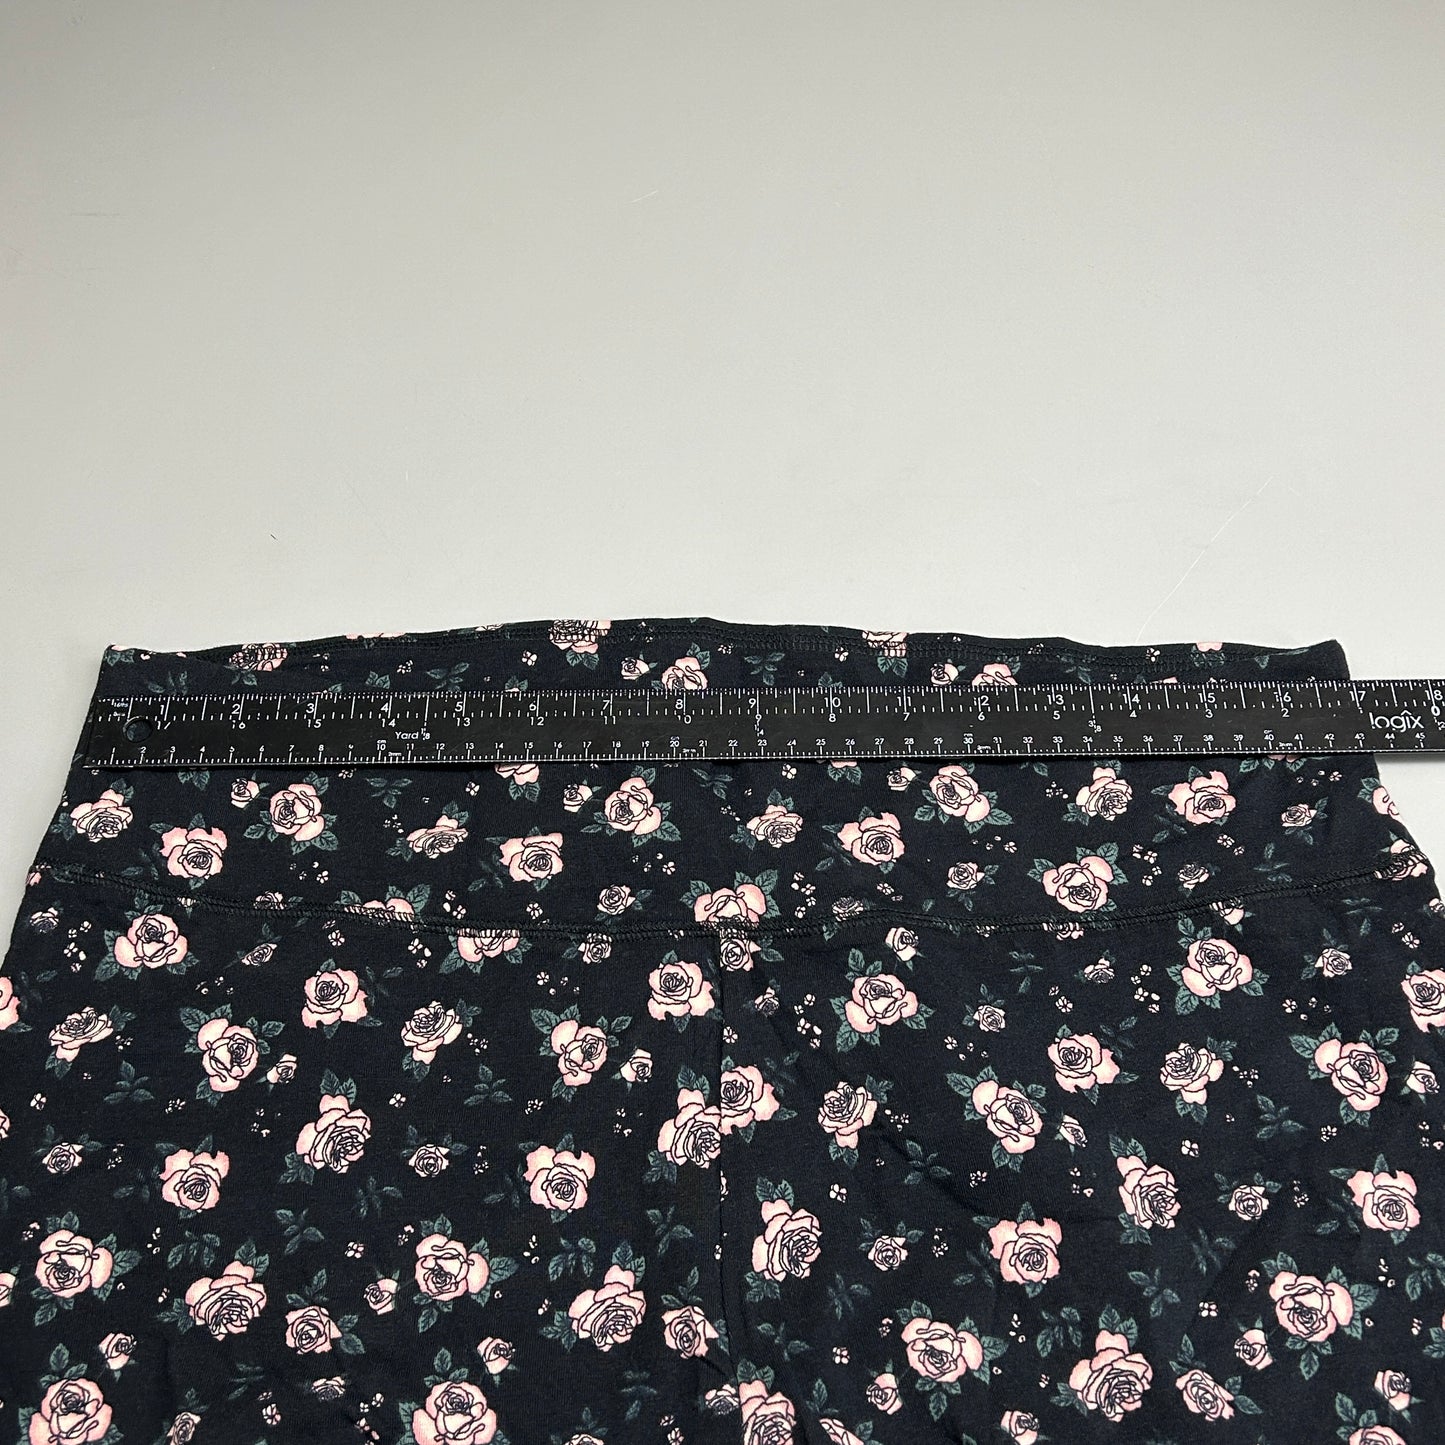 Women’s Wild Fable High waisted Classic Leggings Black Floral